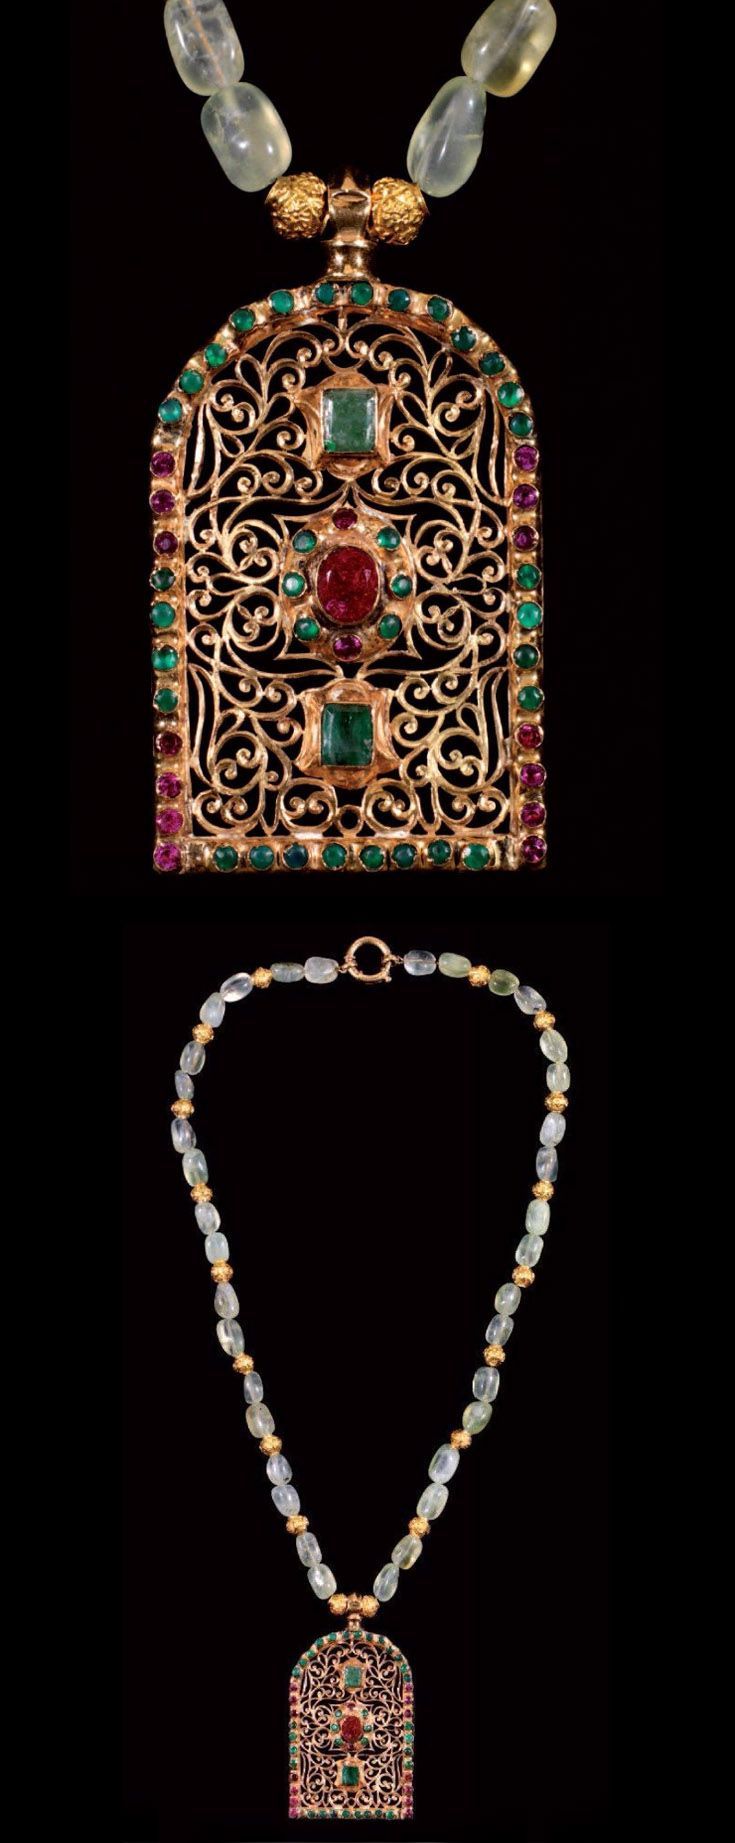 Emerald, ruby, quartz and gold necklace, Morocco.